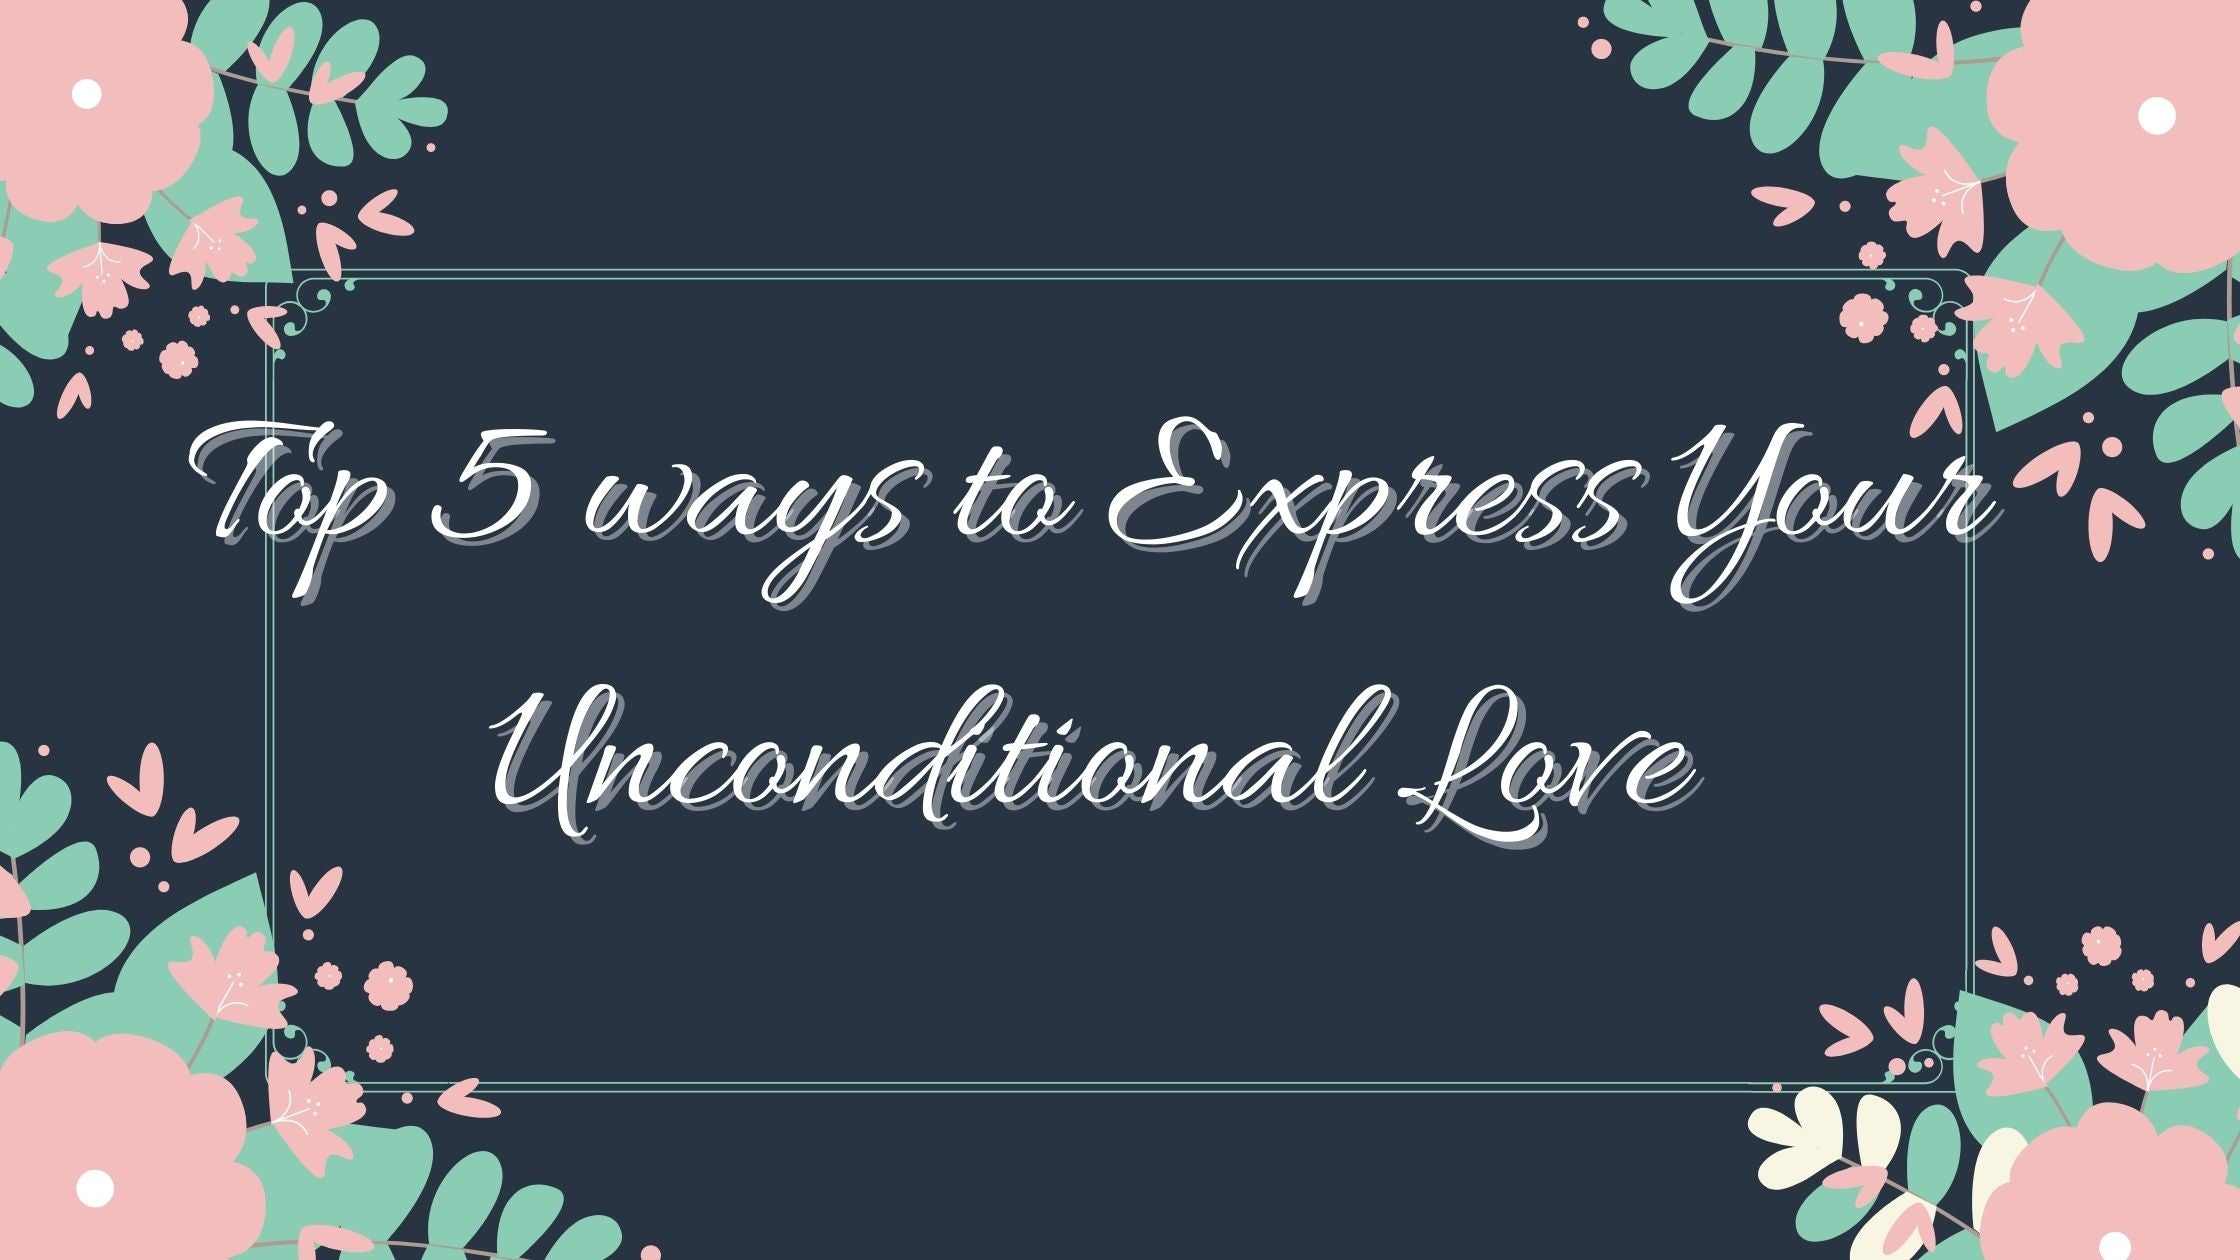 Top 5 ways to Express Your Unconditional Love